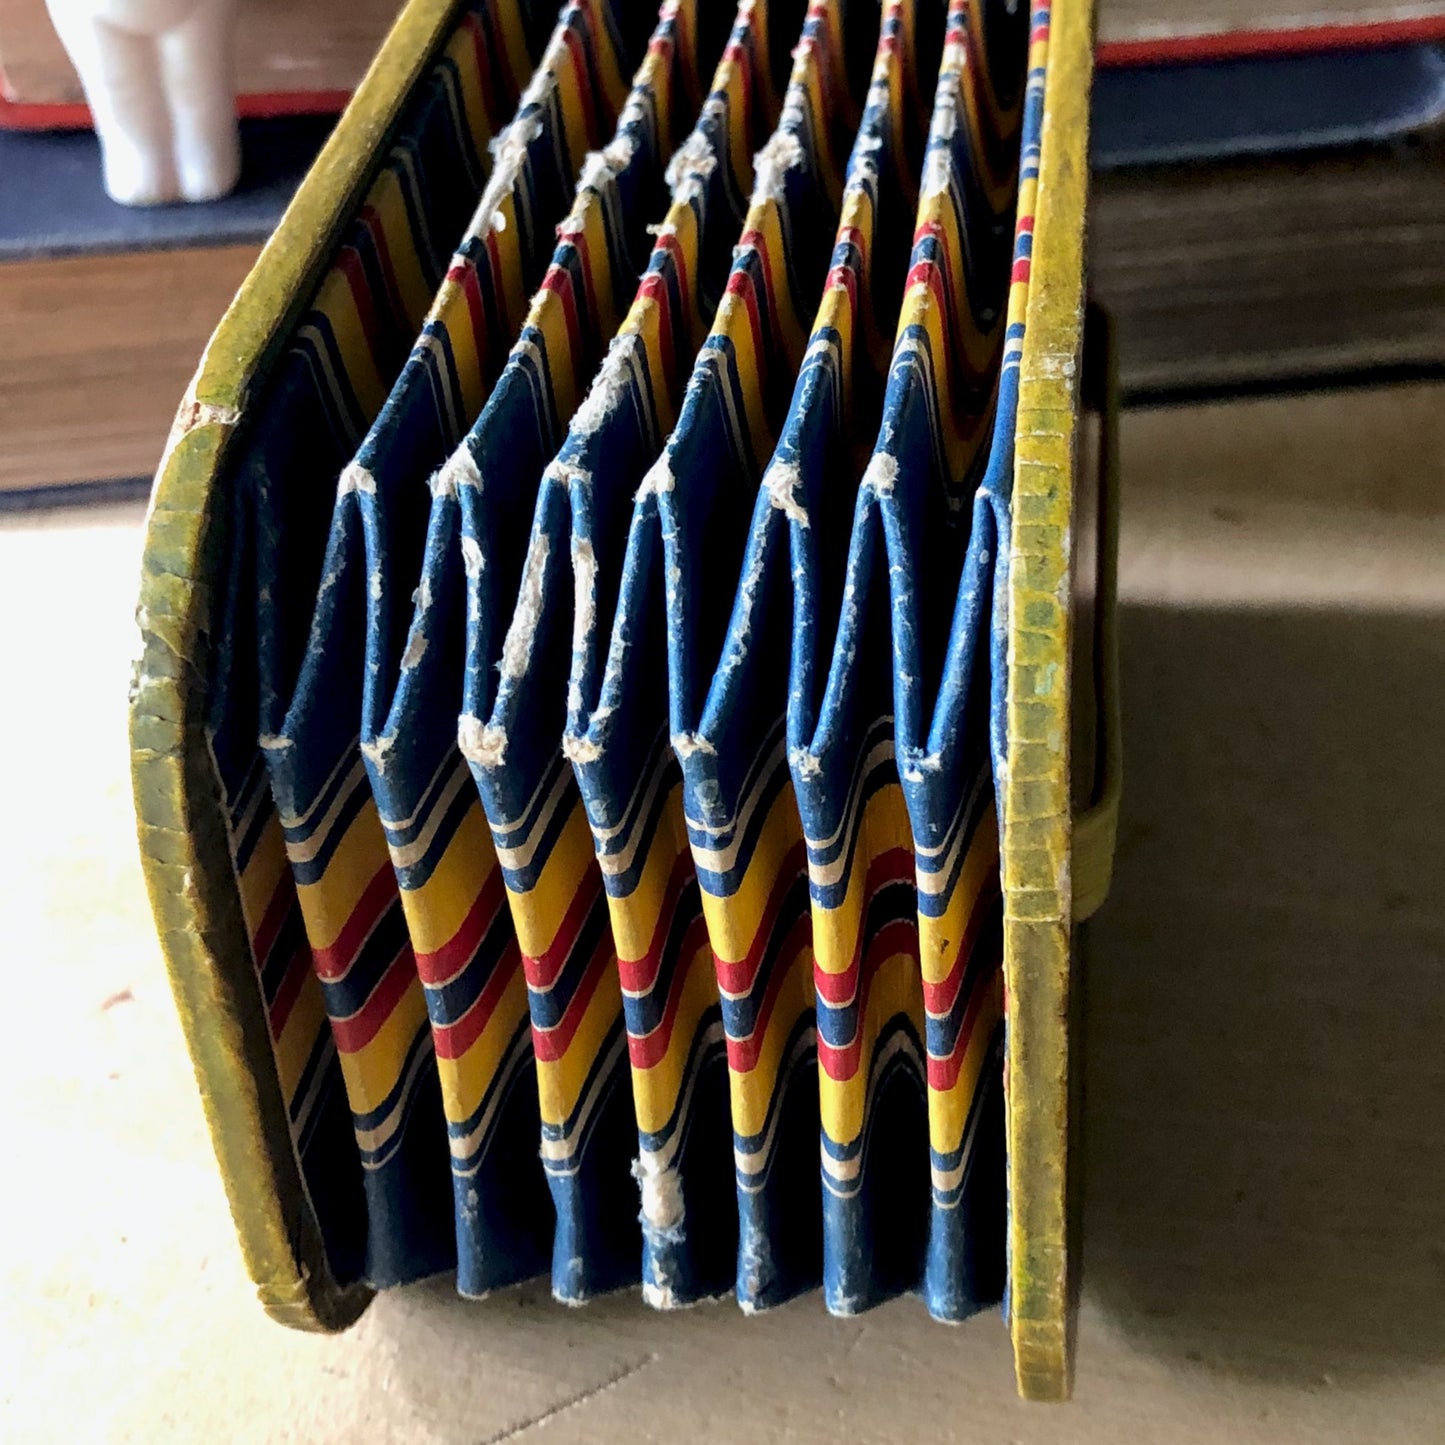 Vintage Toy Paper Accordion, Made in China (c.1950s)